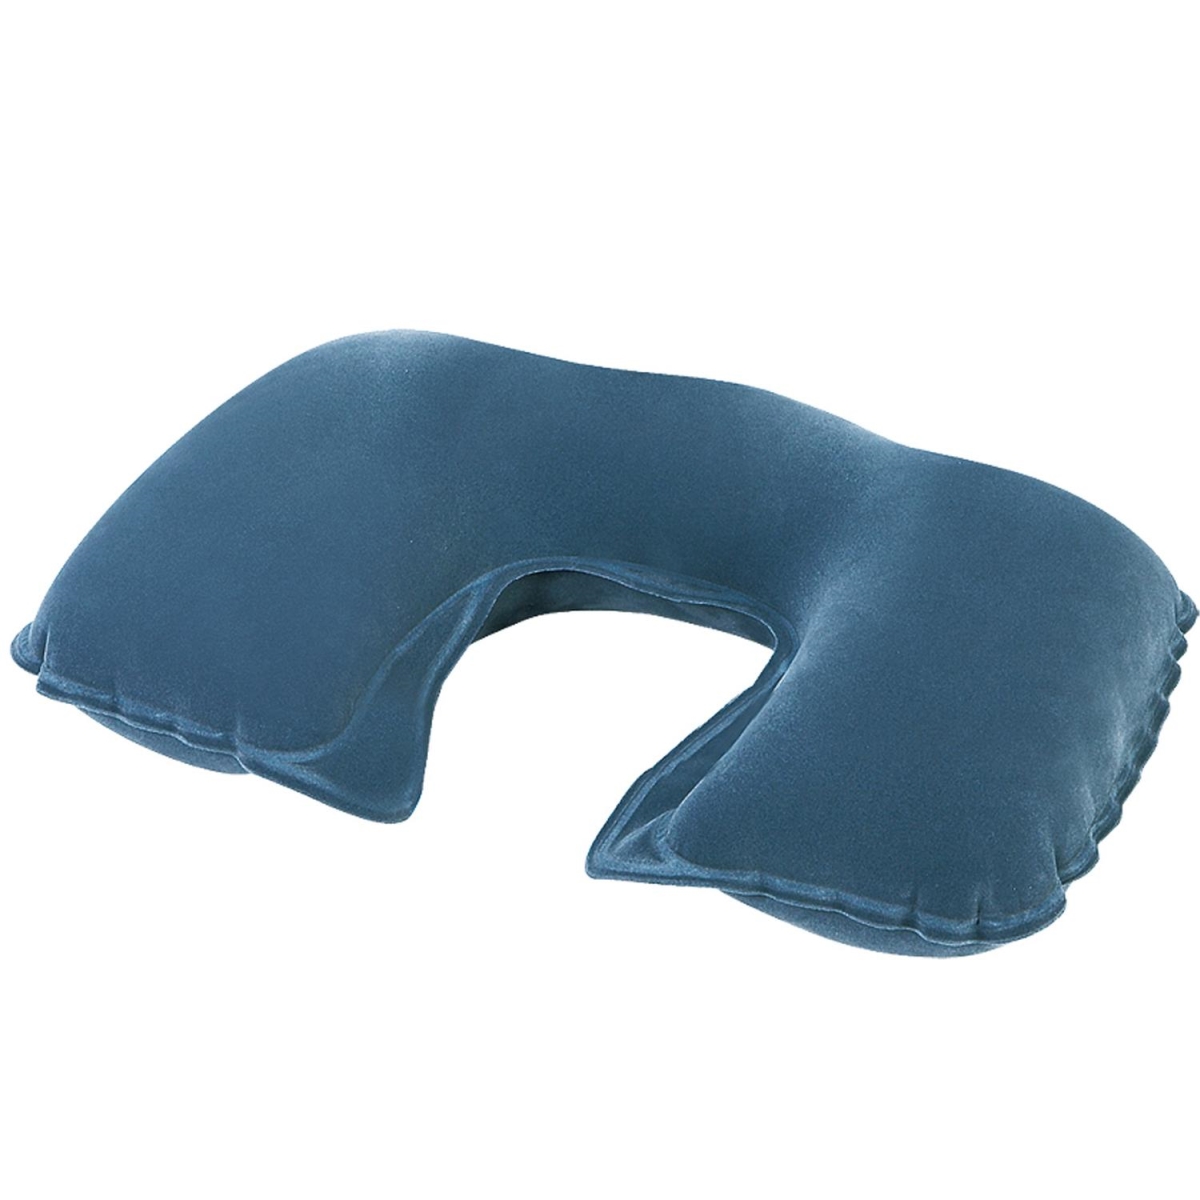 32598674 18 In. Gray Inflatable Travel Comfort Air Neck Pillow